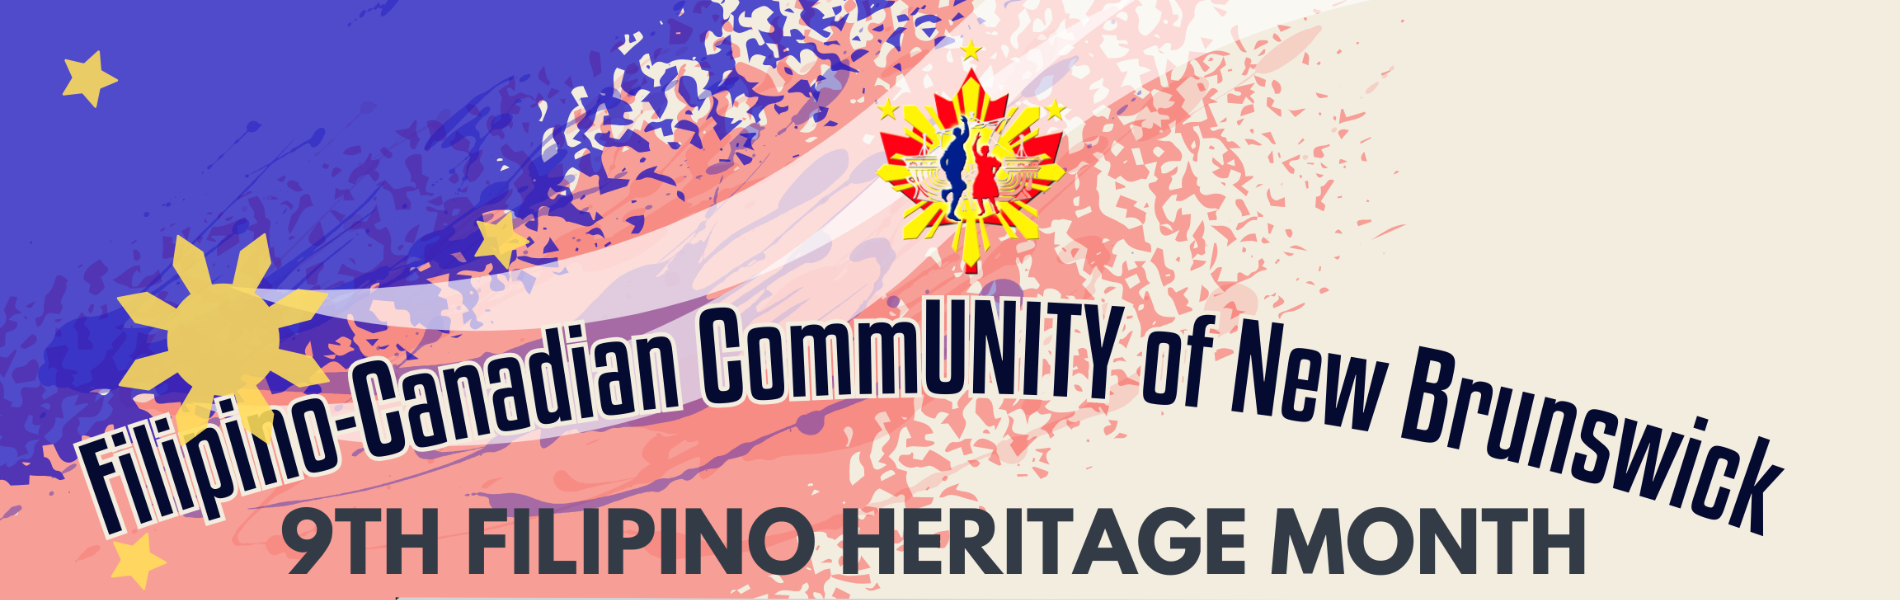 The words Filipino Canadian CommUNITY of New Brunswick in bold black lettering on a colourful blue, pink and beige background.